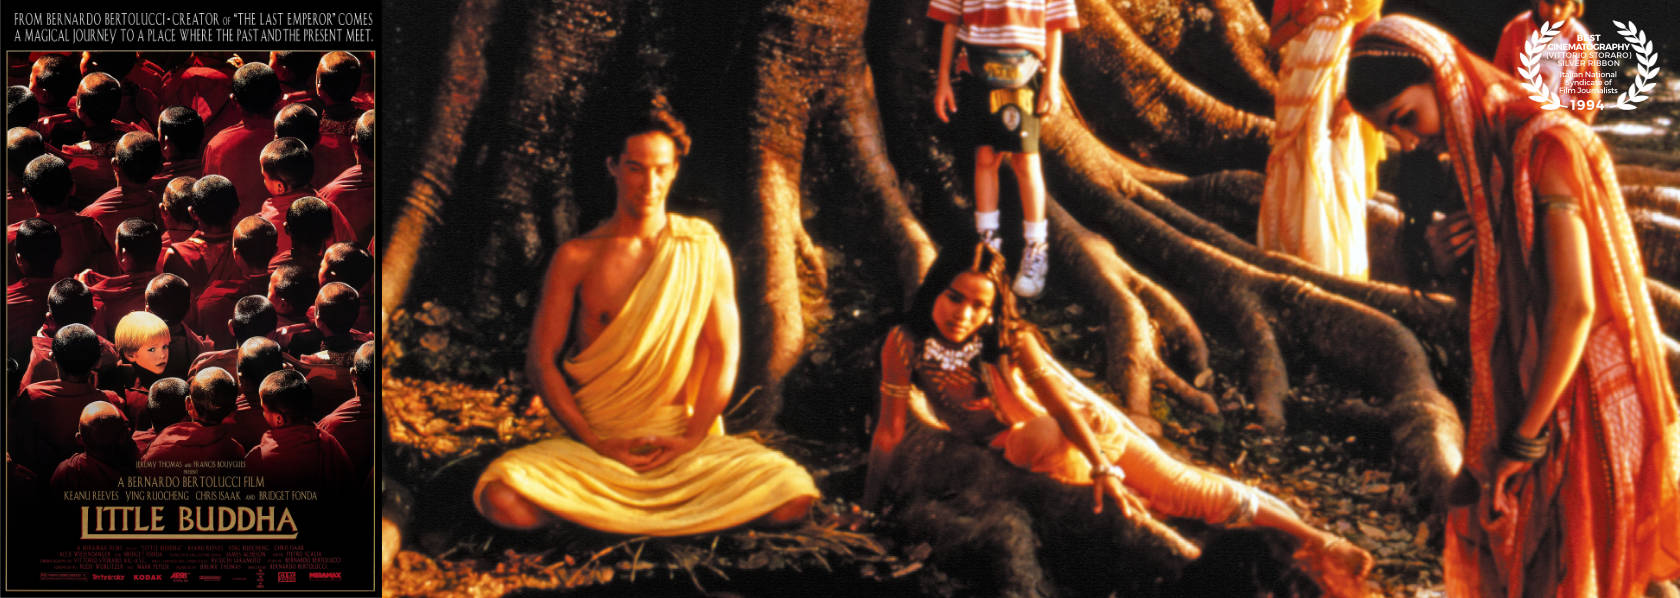 LITTLE BUDDHA - Actor Keanu Reeves as The Buddha sitting under the Bodhi tree child Jesse Conrad watches - THIS Buddhist Film Festival